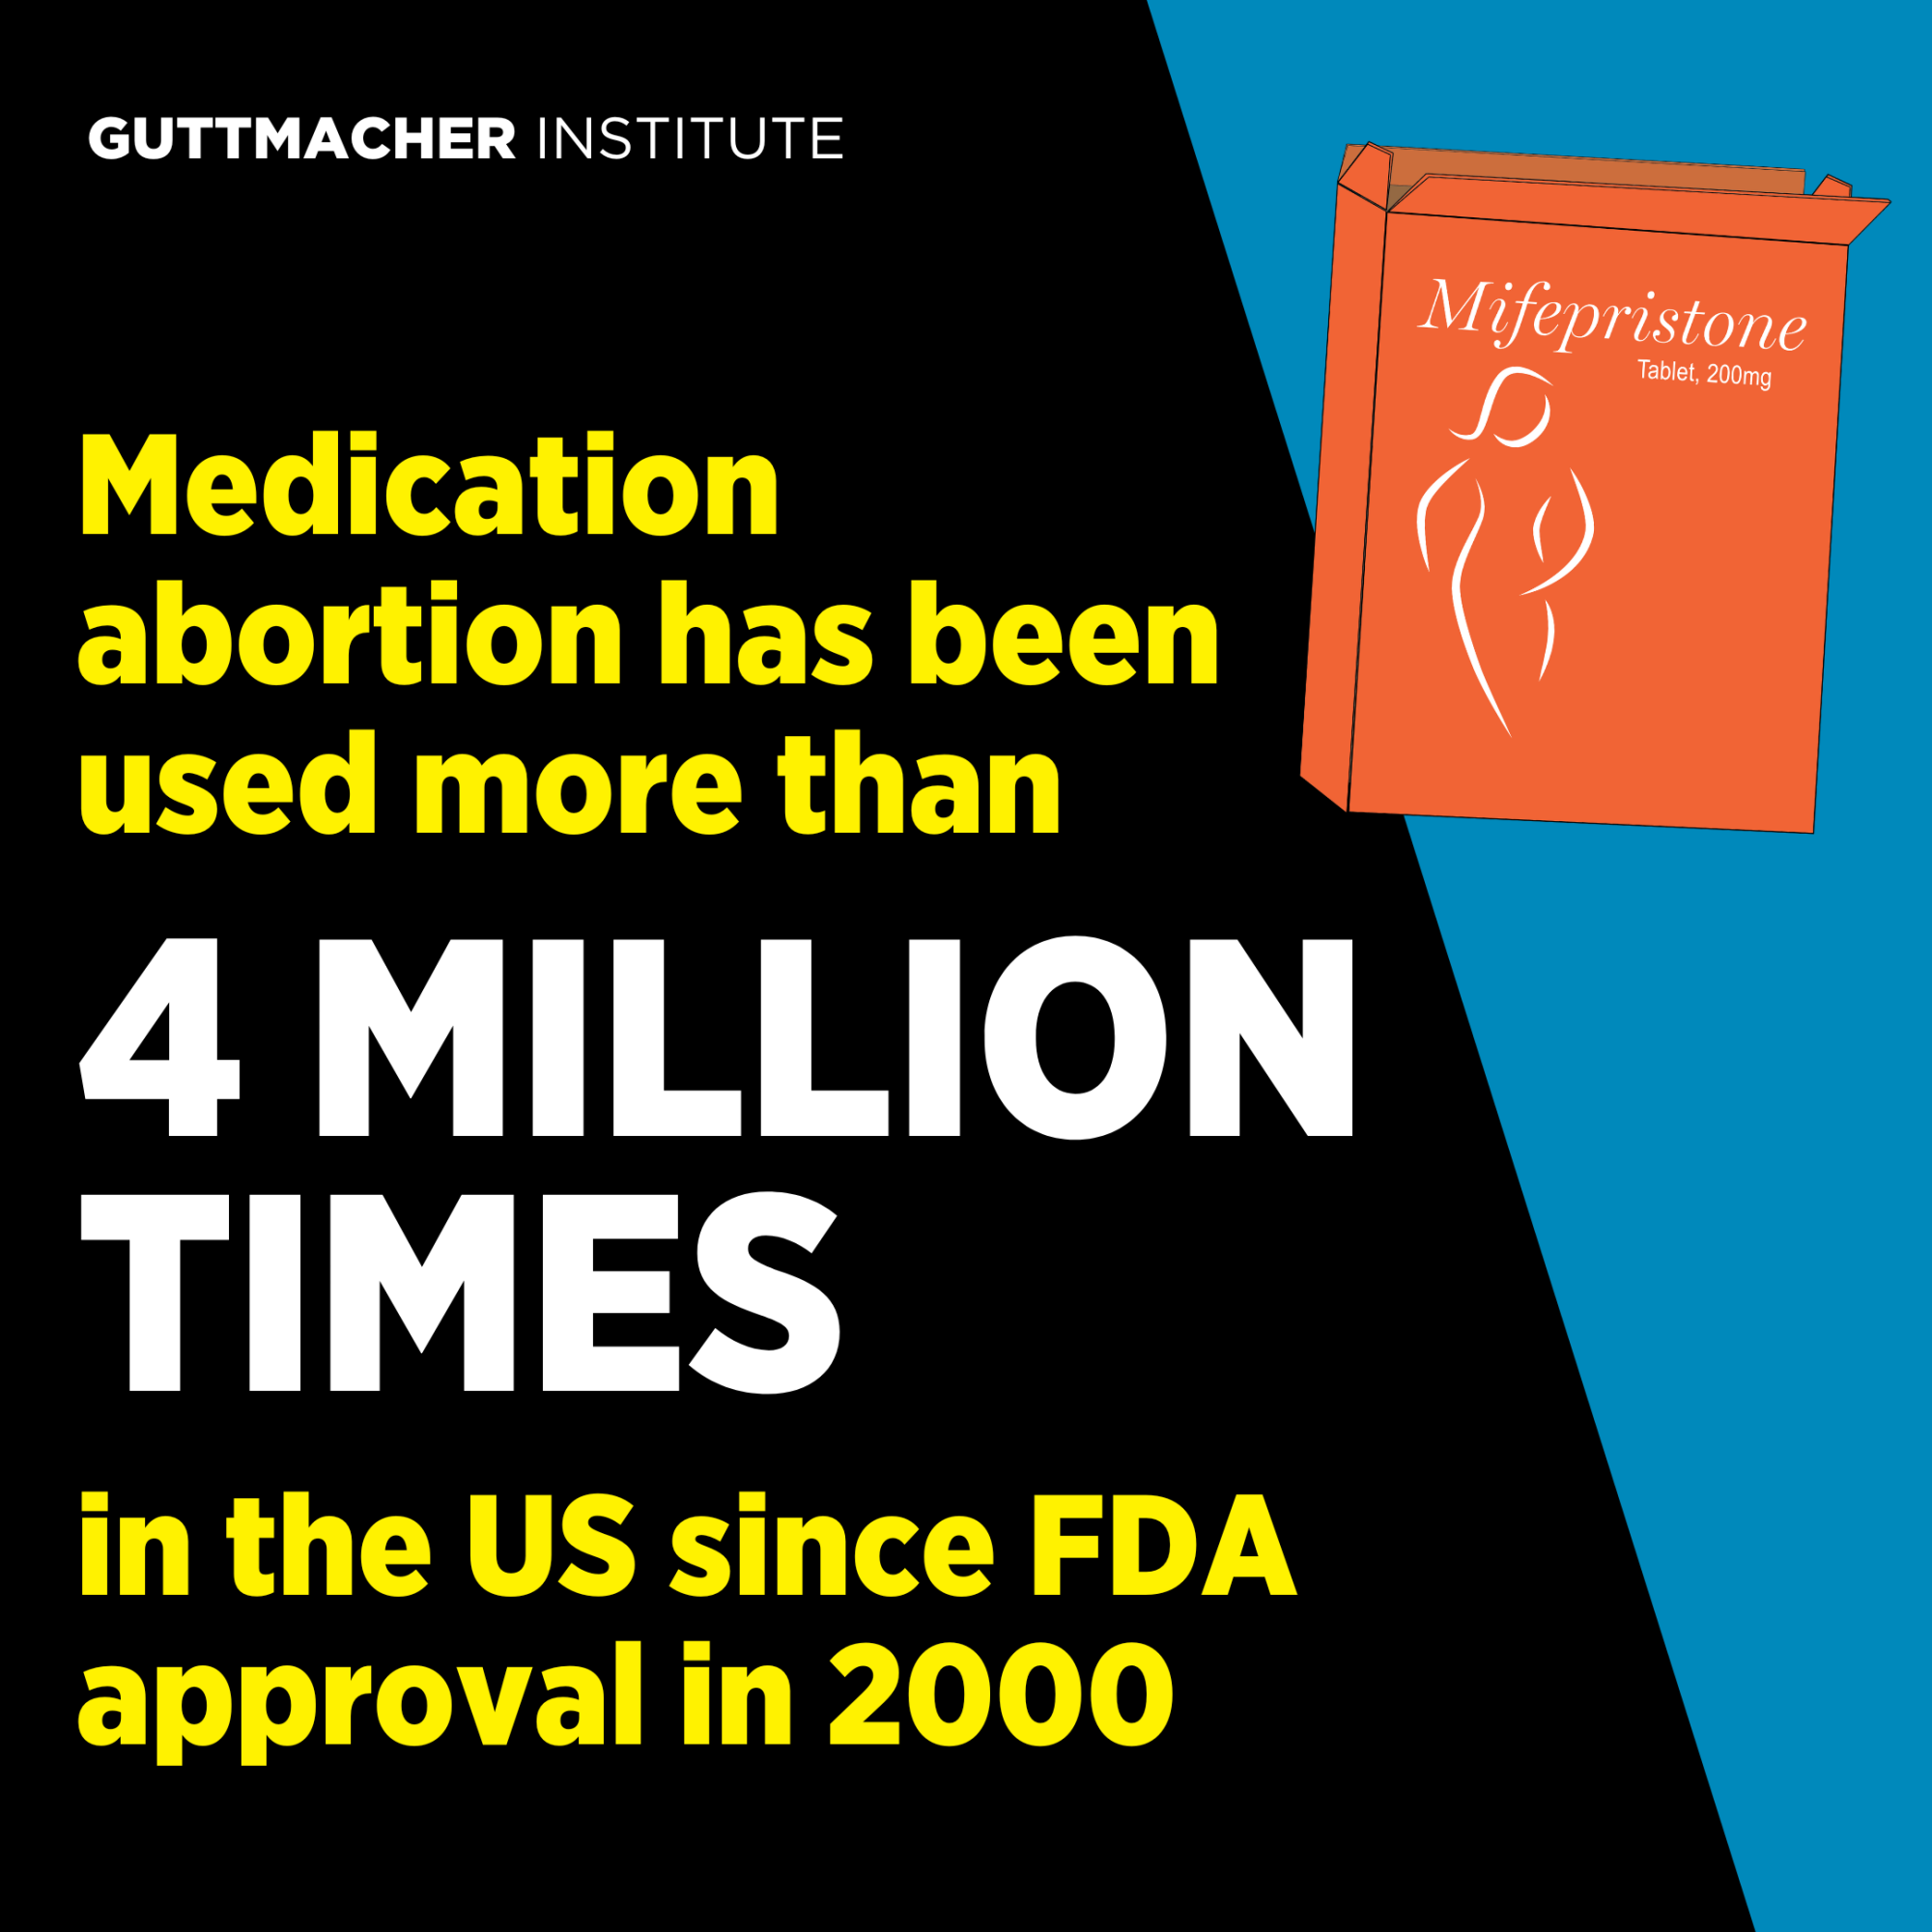 Instagram format text graphic reading Medication abortion has been used more than 4 million times in the US since FDA approval in 2000